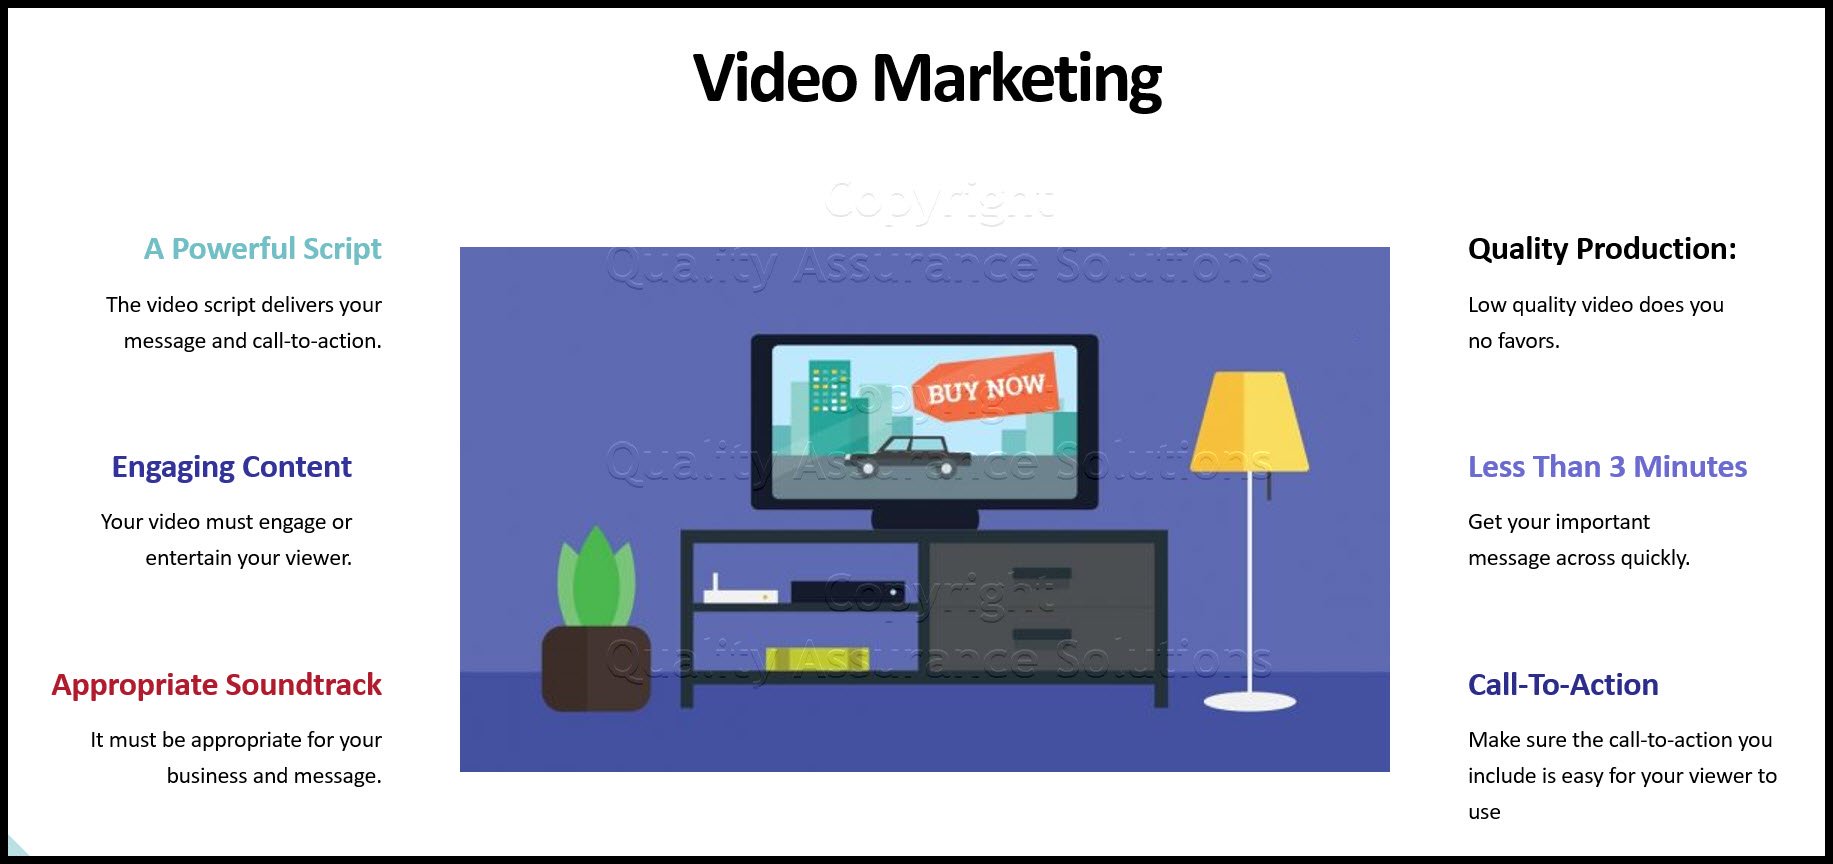 Uncover six crucial elements for your digital marketing video.